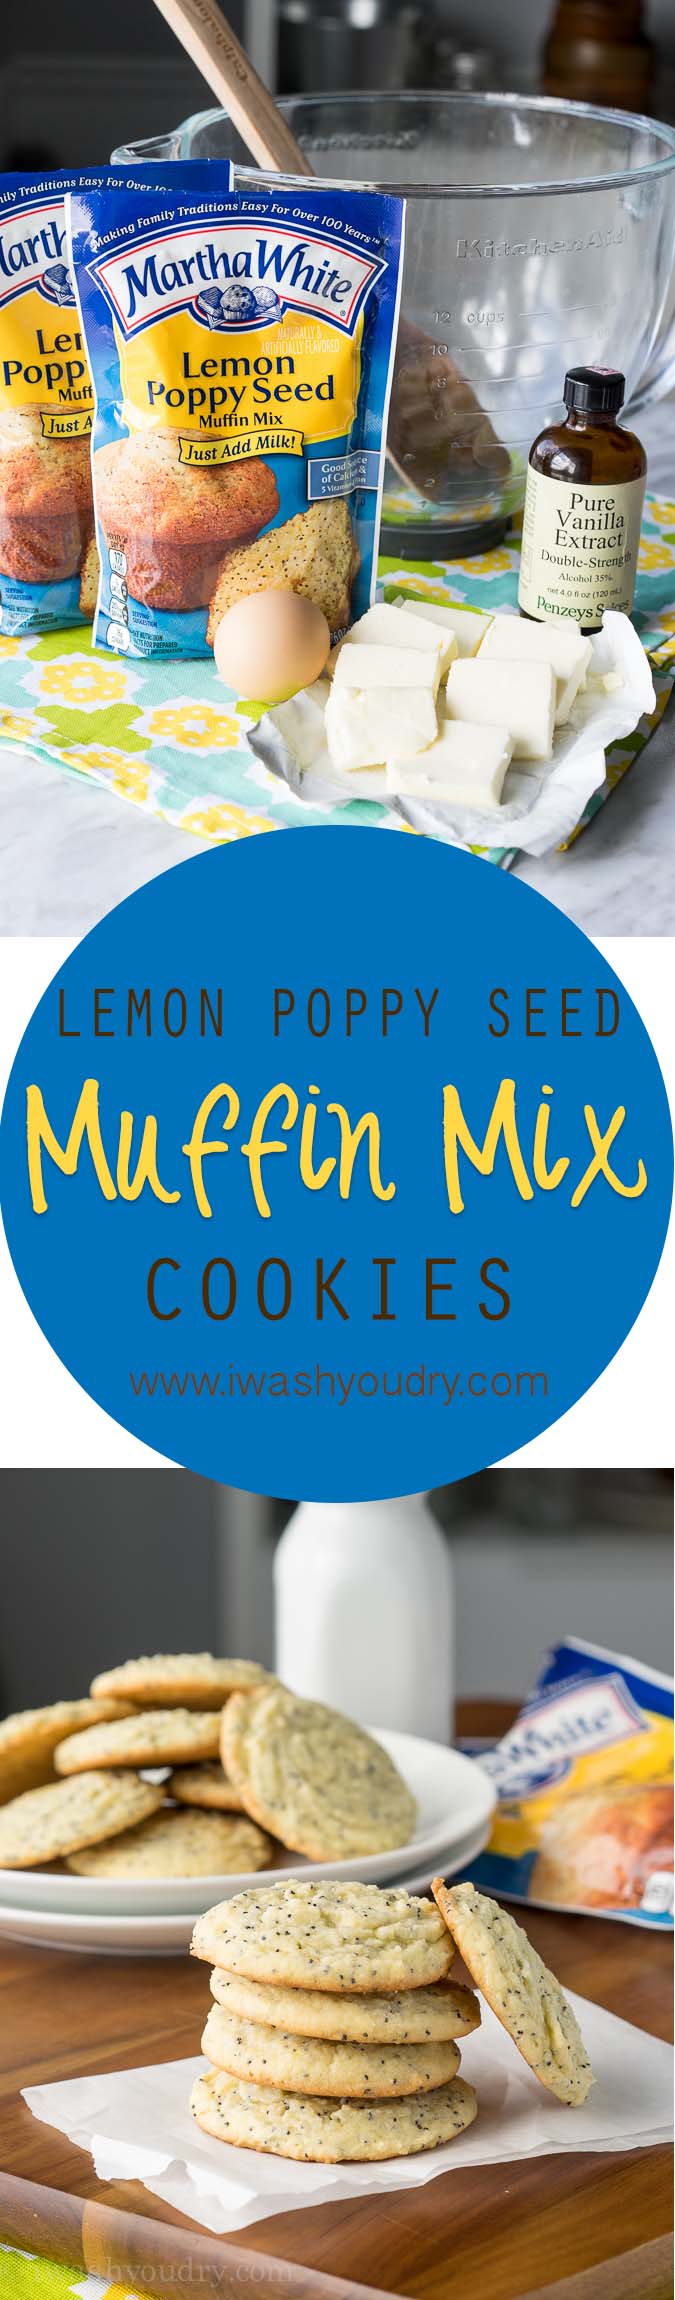 Super easy Lemon Poppy Seed Muffin Mix Cookies made with just 4 simple ingredients!